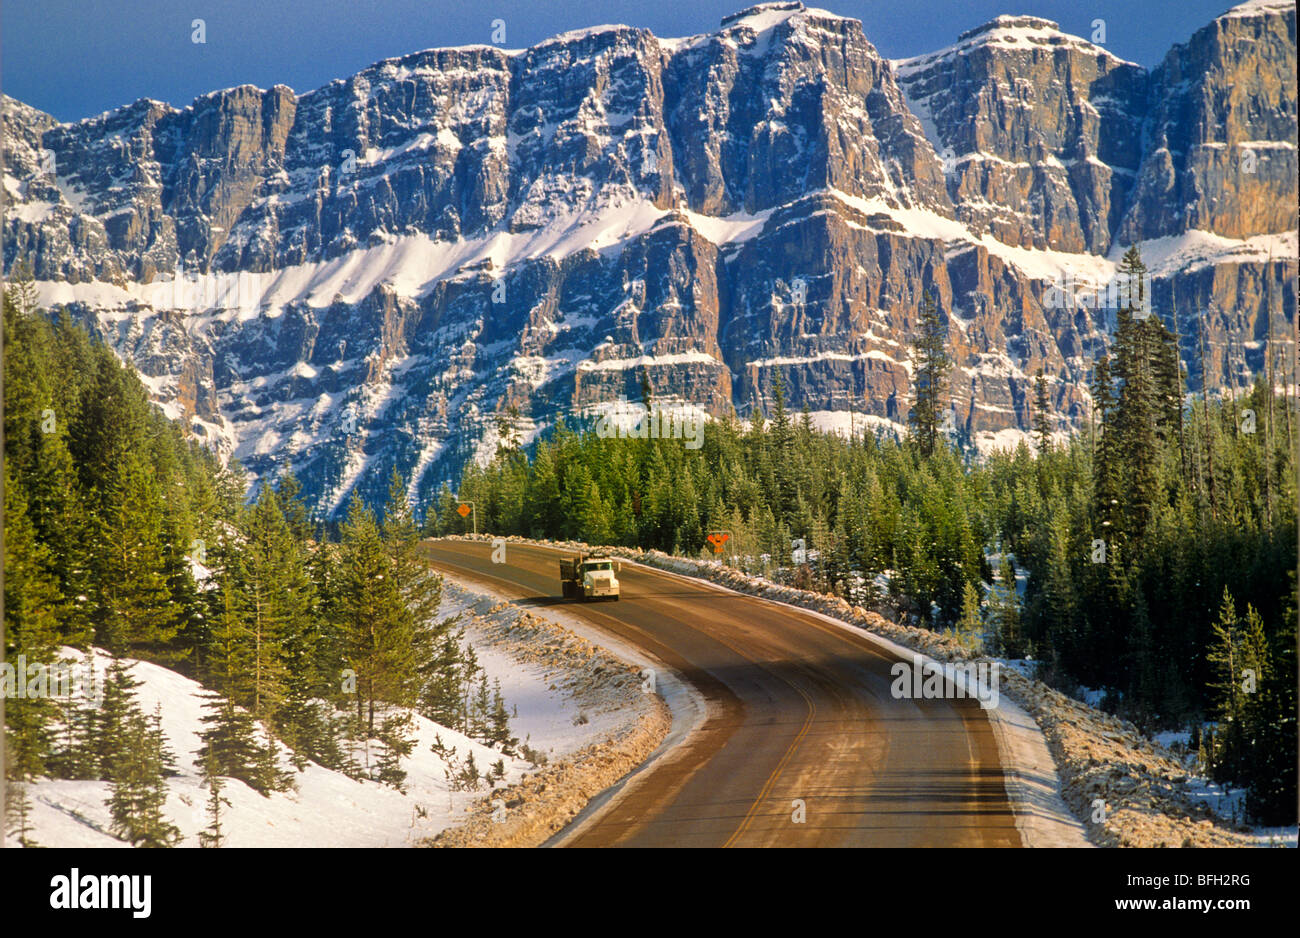 Truck driving on Trans Canada Highway with Castle Mountain in background. Banff National Park, Alberta, Canada Stock Photo